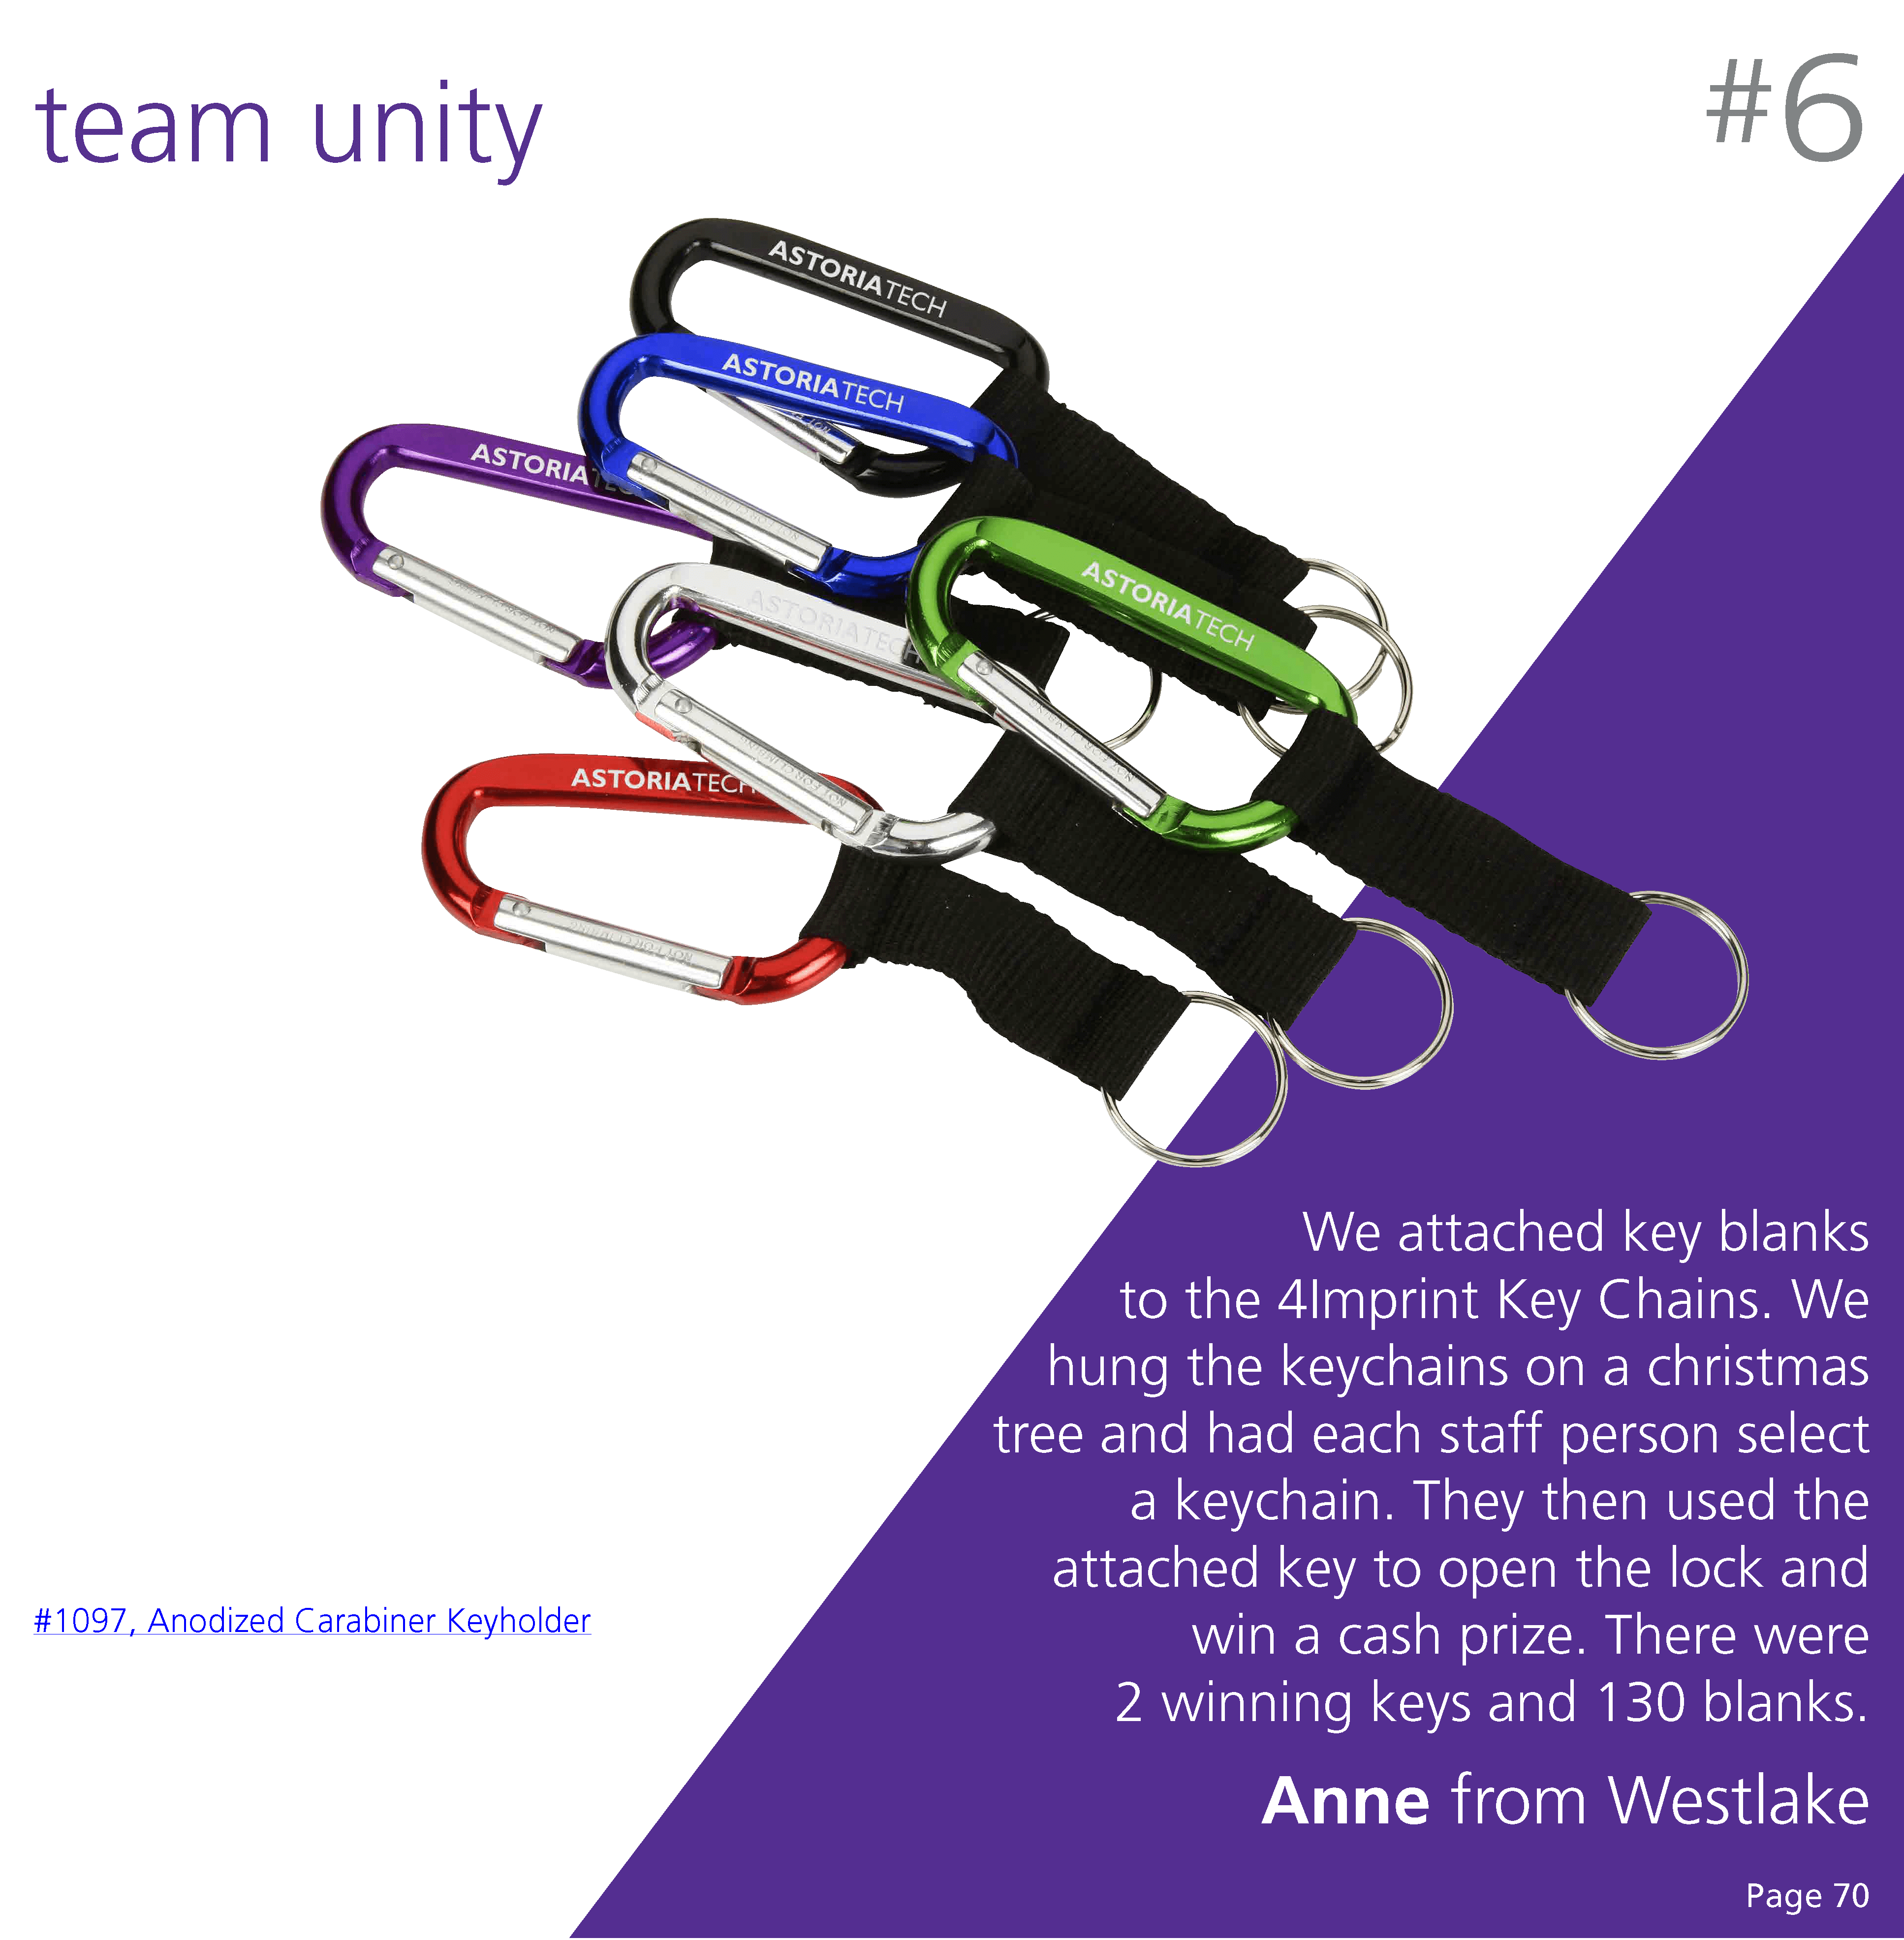 Anodized Carabiner Keyholder from 4imprint